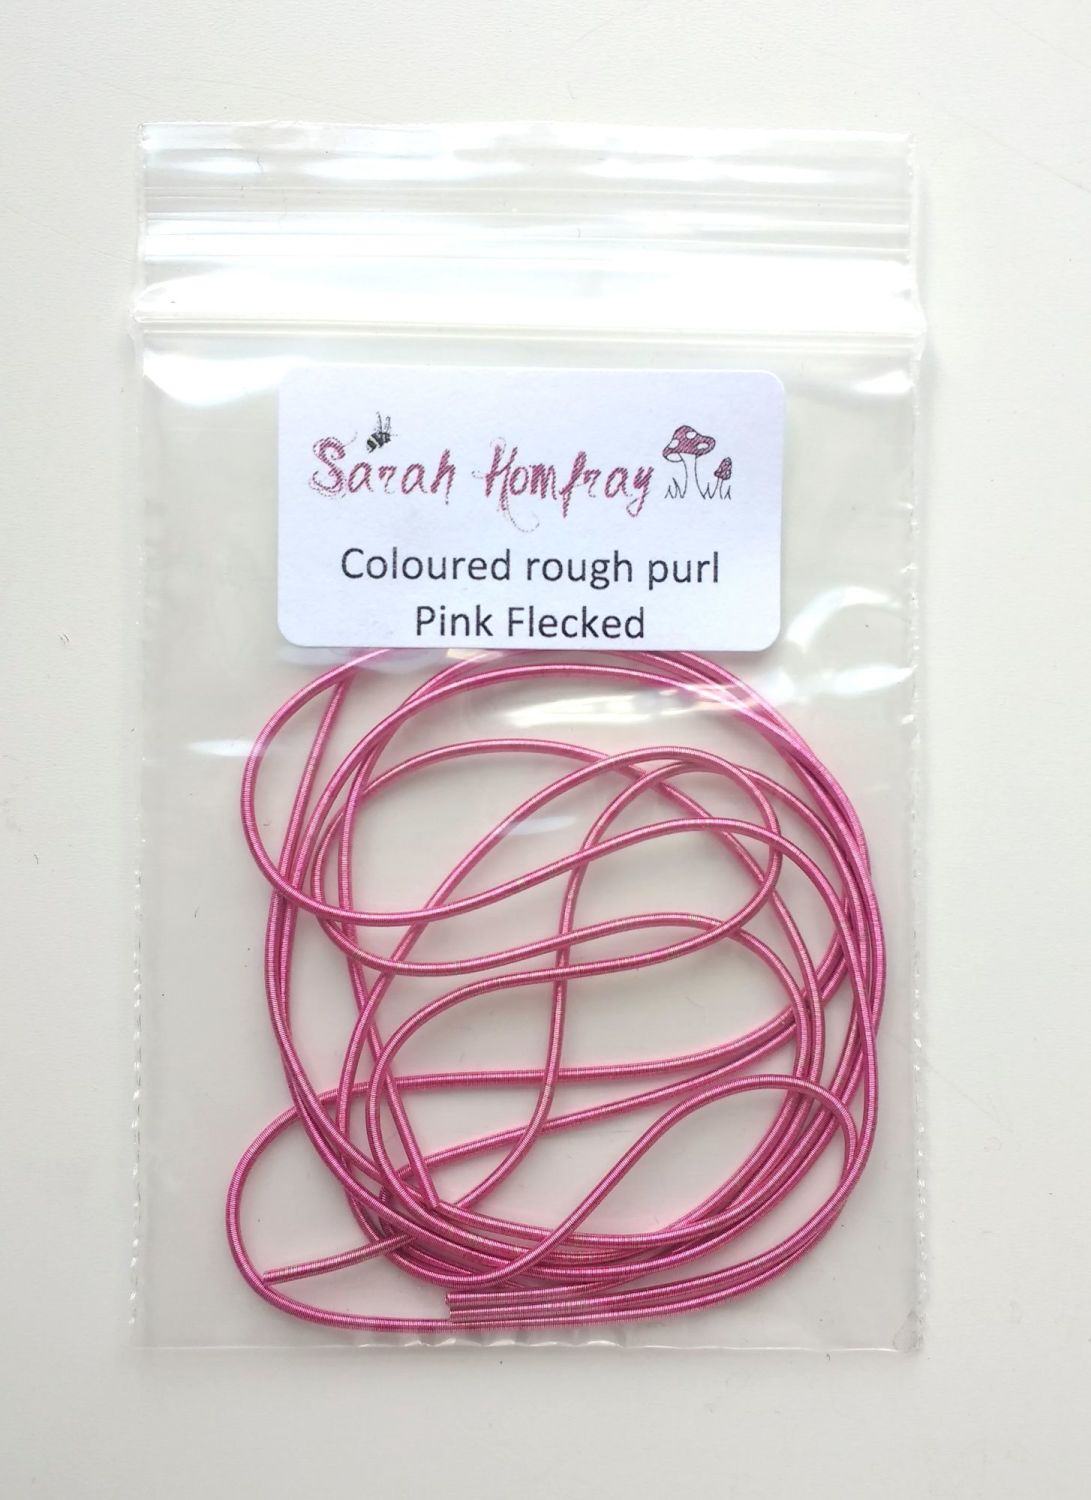 NEW! Coloured Rough purl no.6 - Pink Flecked